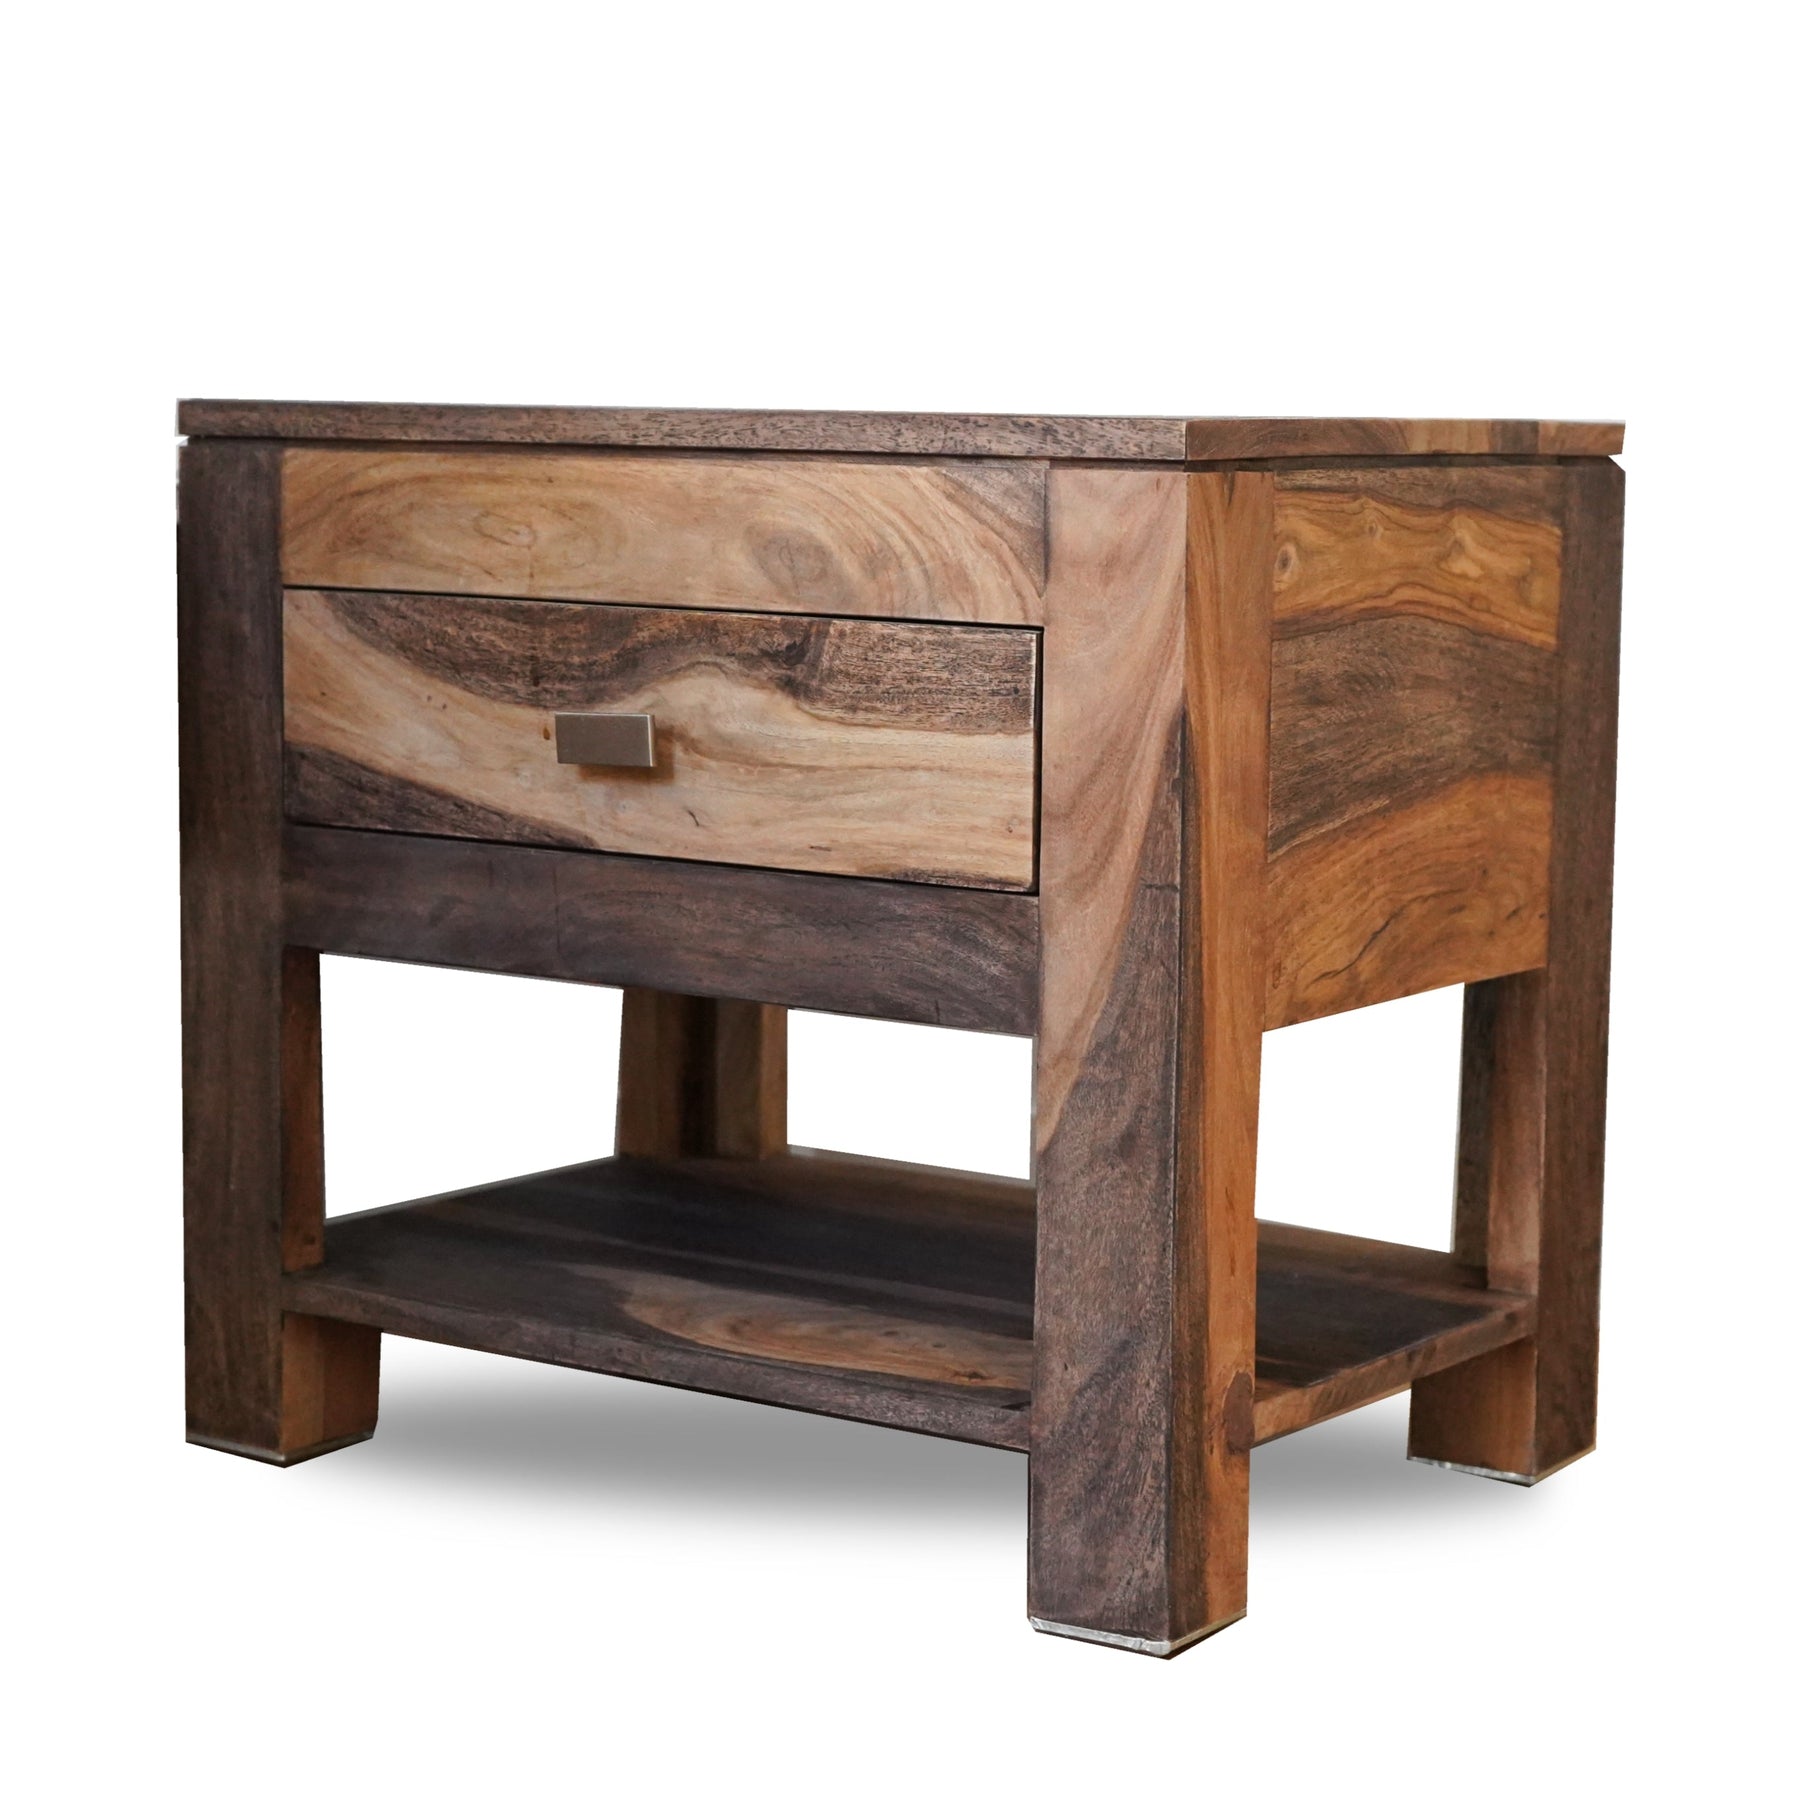 Zen Night Table - Wooden Beside Table with Drawer and Storage Shelf | 50x35x45 cm